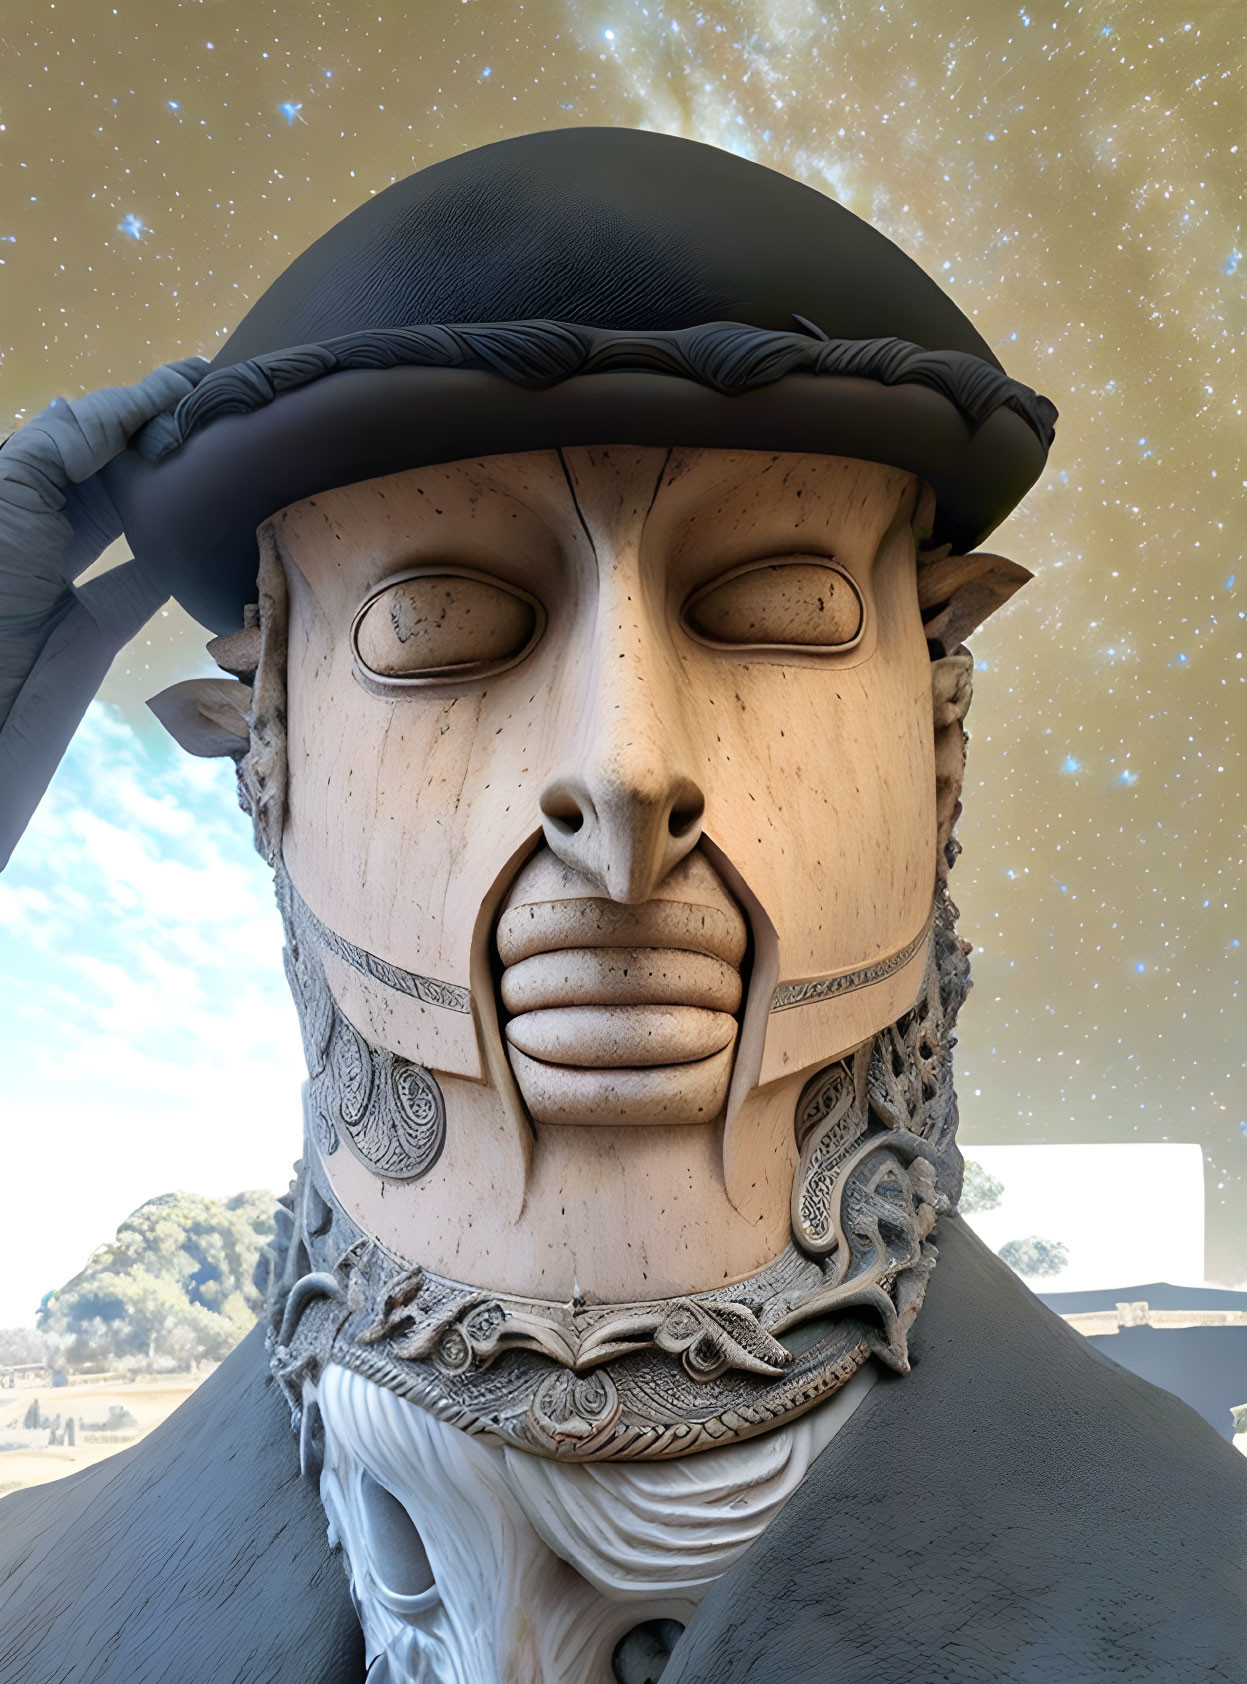 Detailed humanoid face sculpture with closed eyes and beret against starry sky.